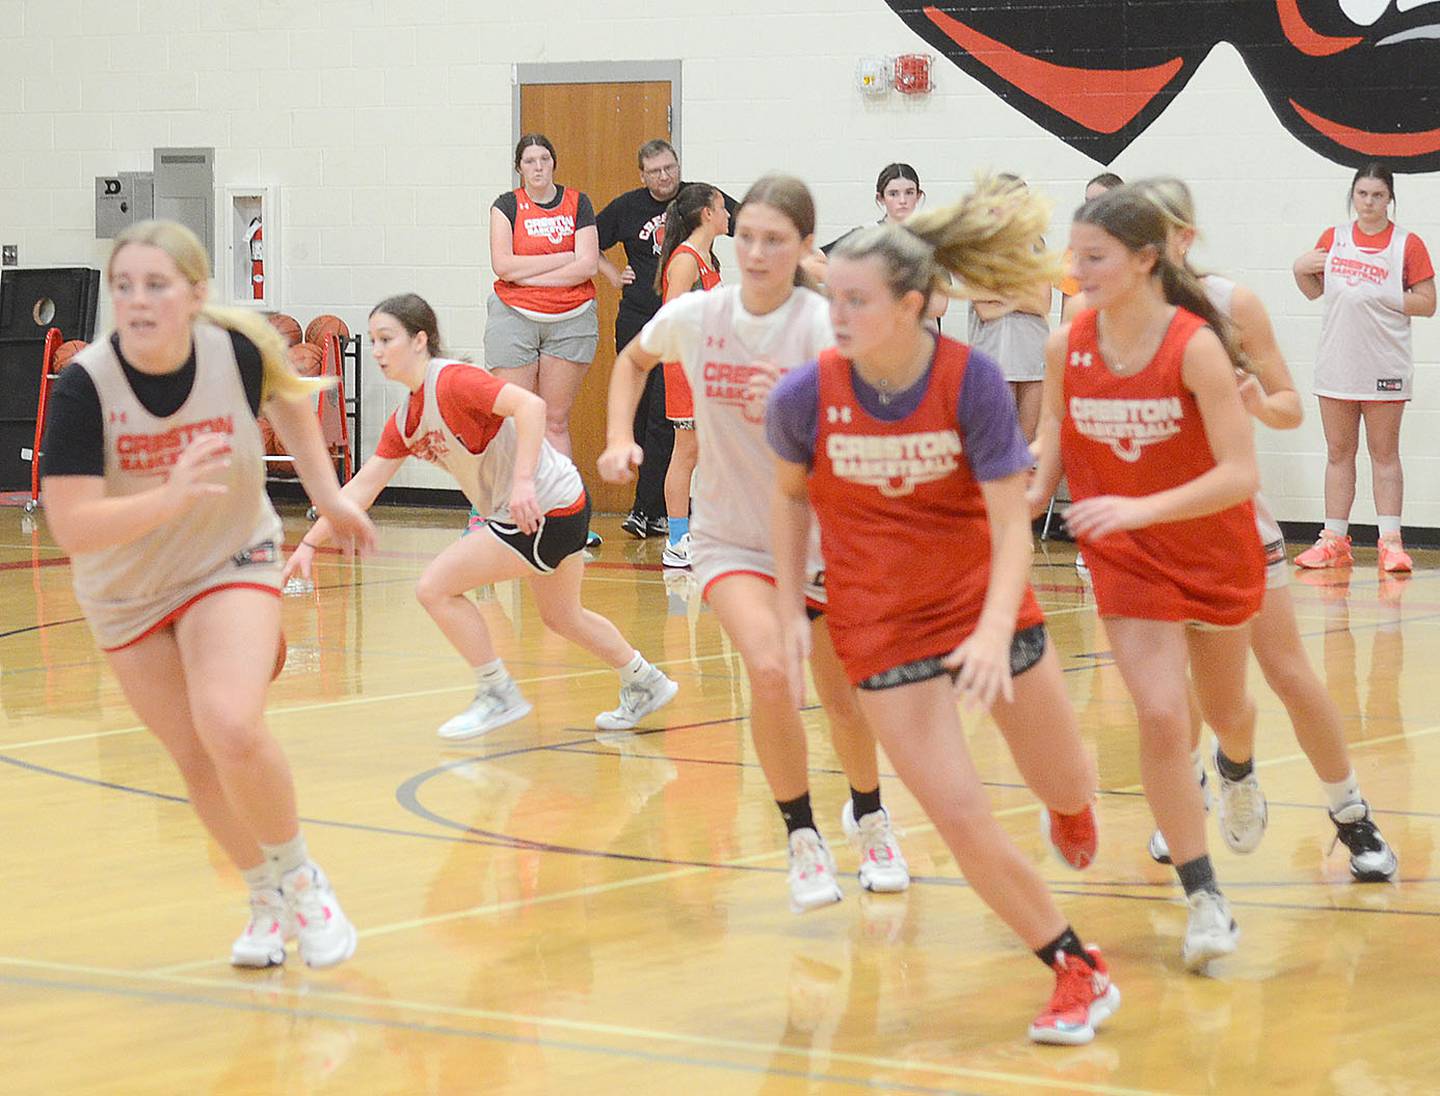 Junior guard Alyssa Gerdes advances the ball during a transition drill in a recent Creston practice. The Panthers are emphasizing a fast-break style this season.